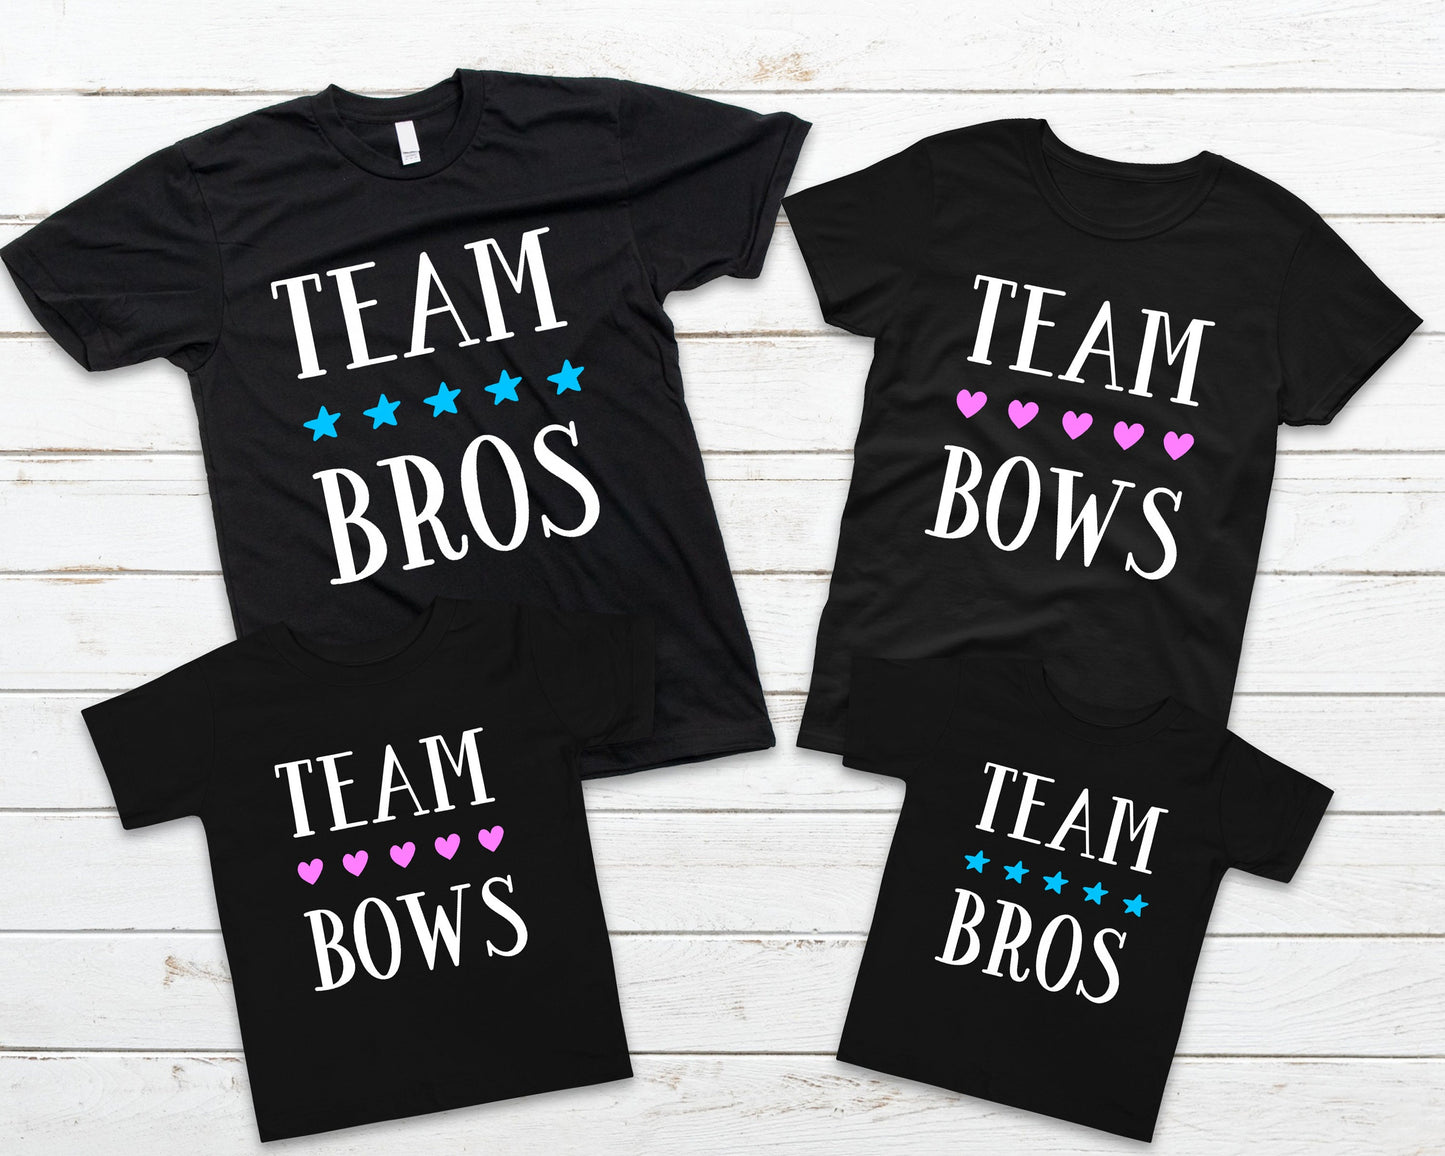 Gender Reveal Party Team Bros and Team Bows Matching T-Shirts or Baby Bodysuits - Matching Tees - Pregnancy Gender Reveal Announcement